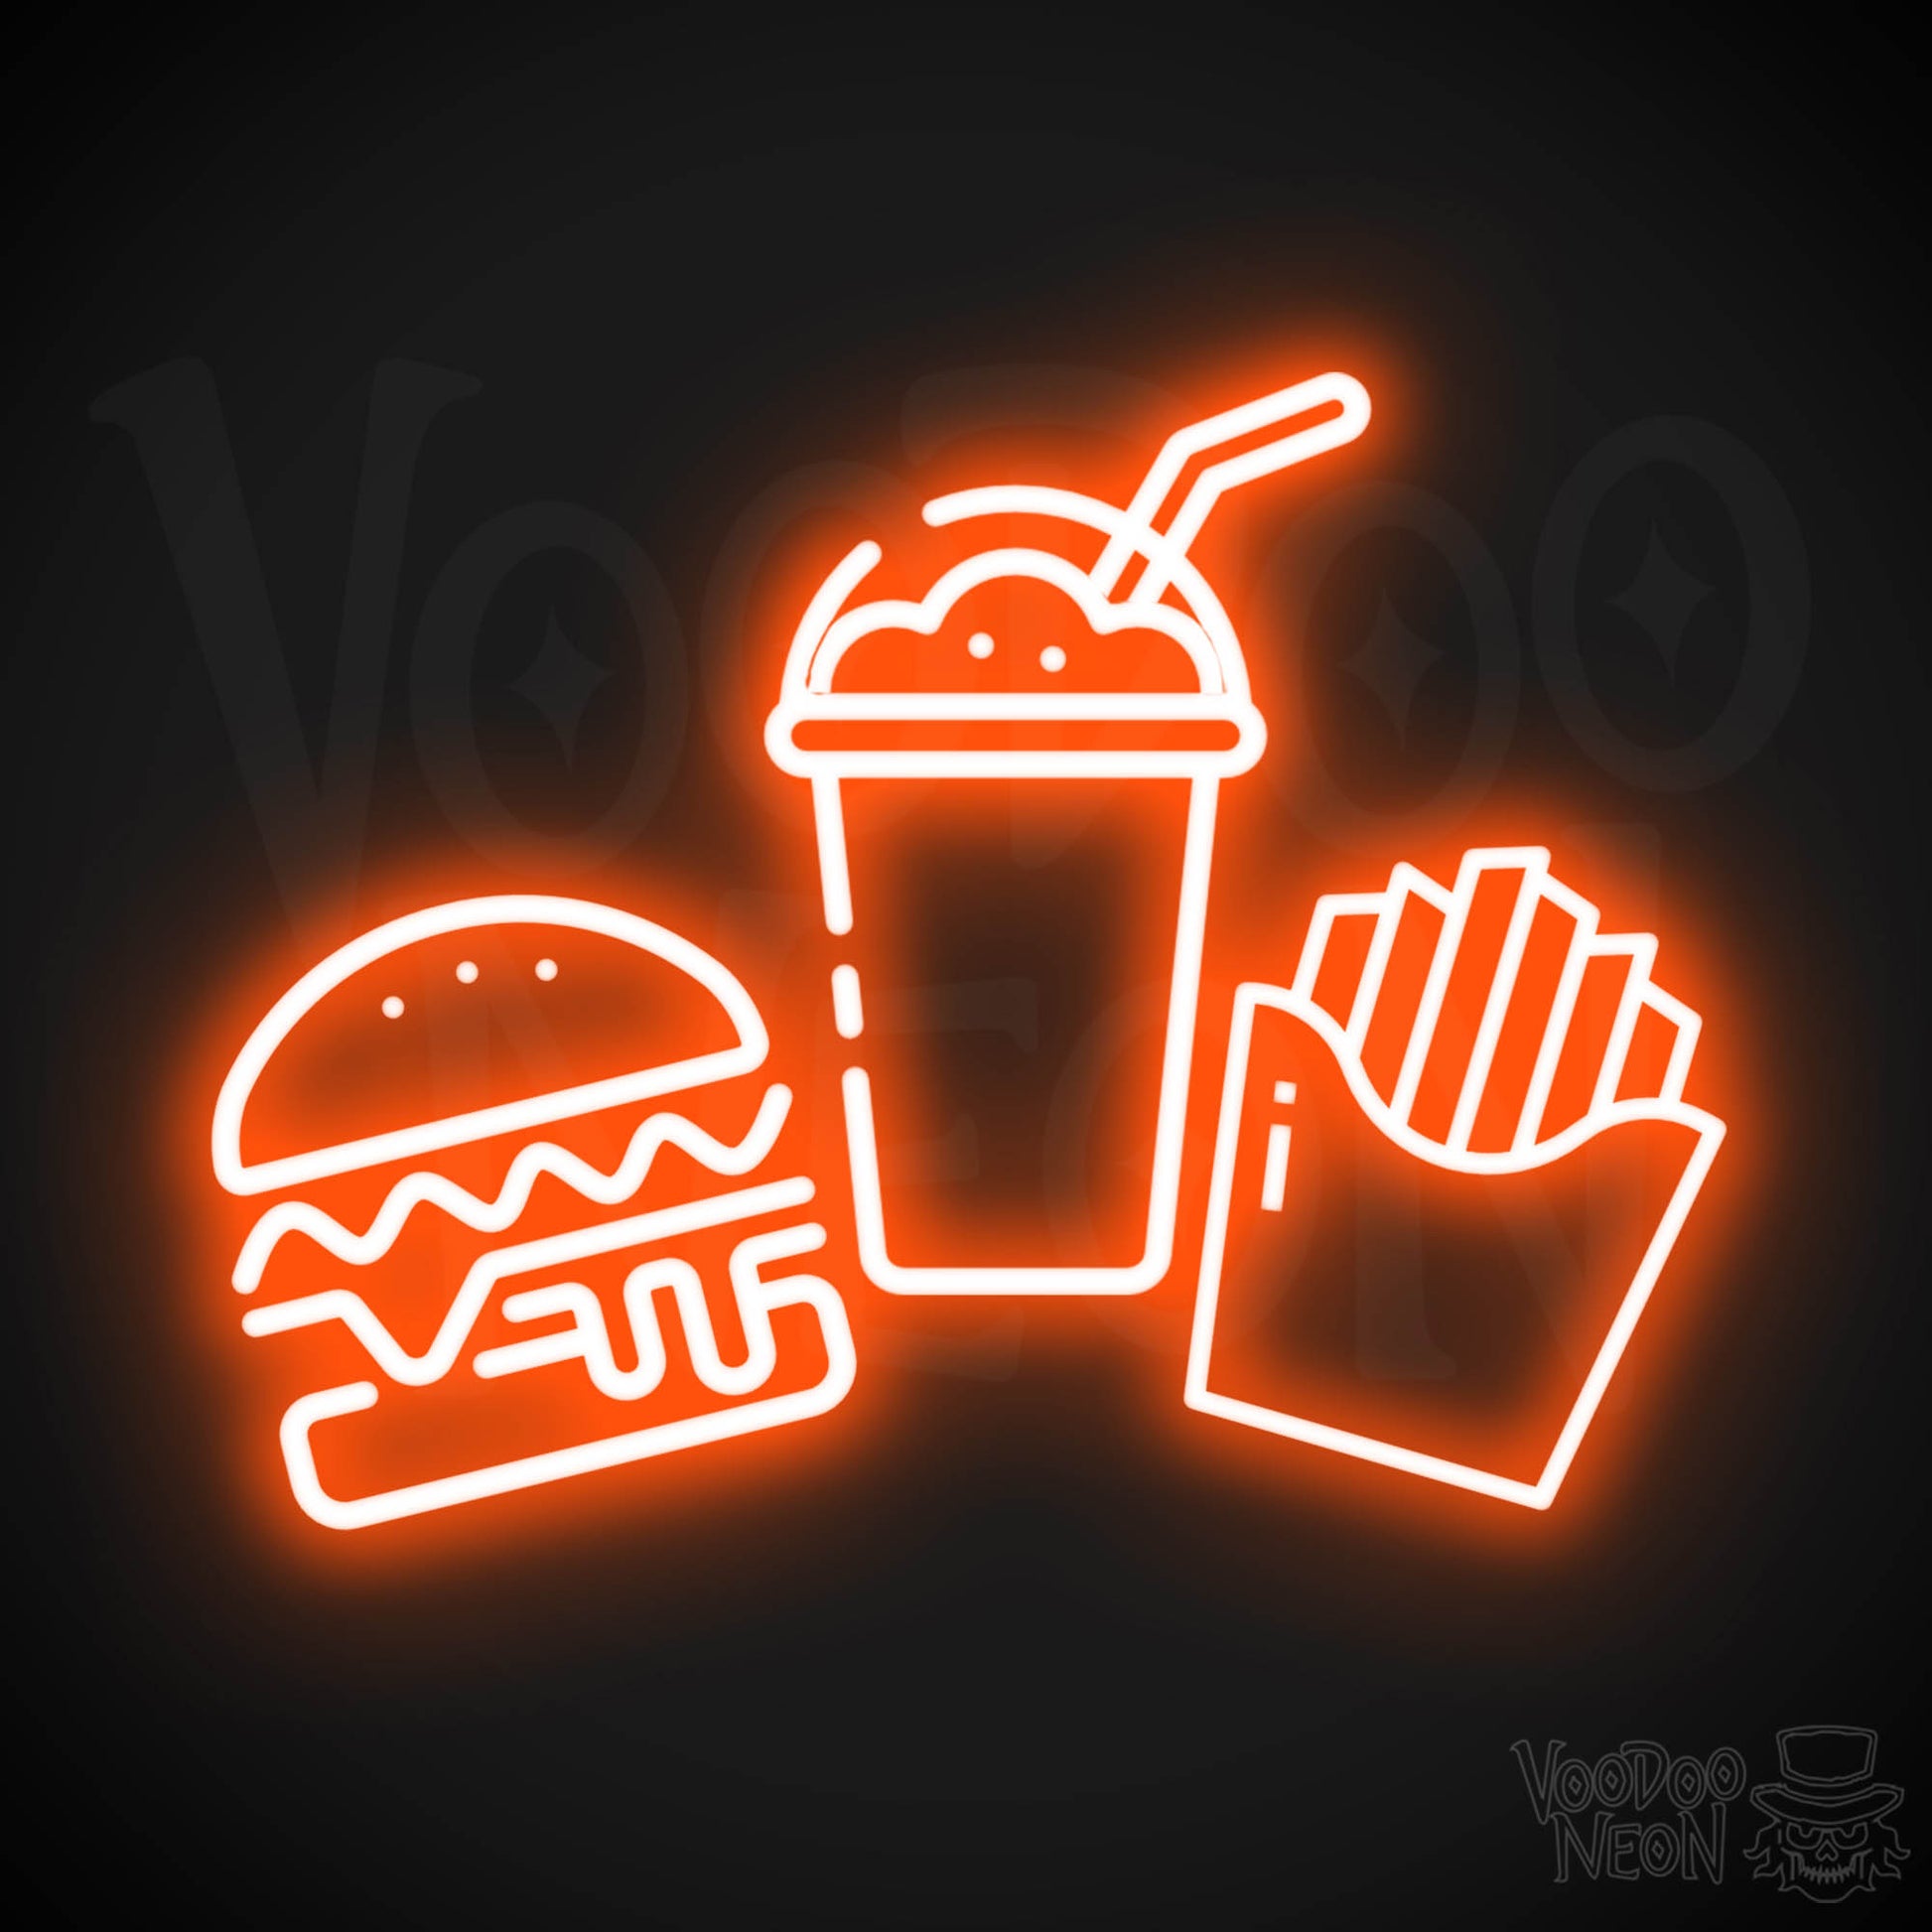 Burgers, Fries & Shakes Neon Sign - Burgers, Fries & Shakes LED Sign - Color Orange